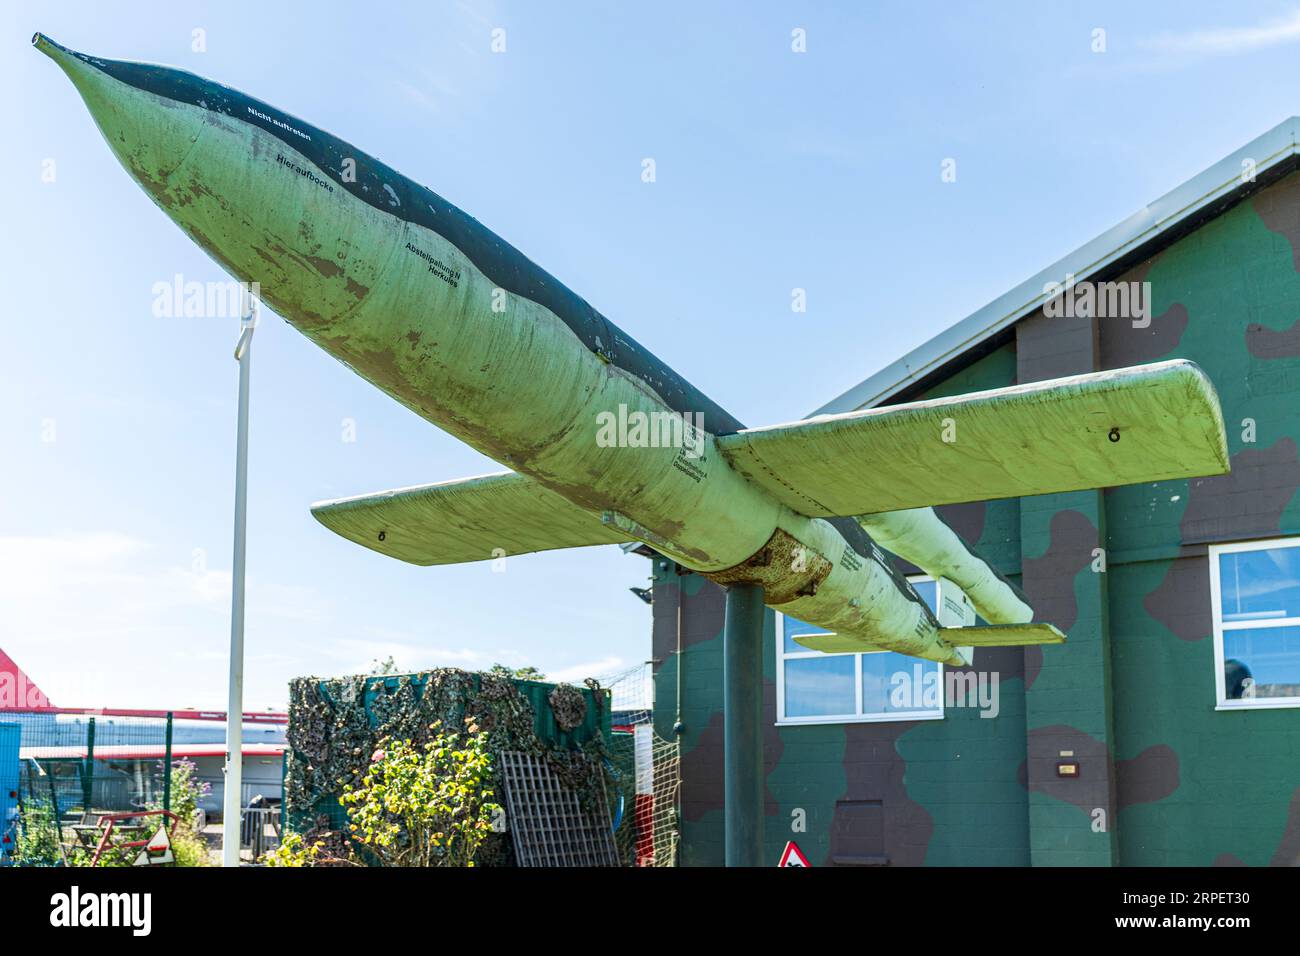 V-1 (vengeance weapon), flying bomb mounted on a stand, on display outside the RAF Manston History Museum in Kent on a summer's day with blue skies. Stock Photo